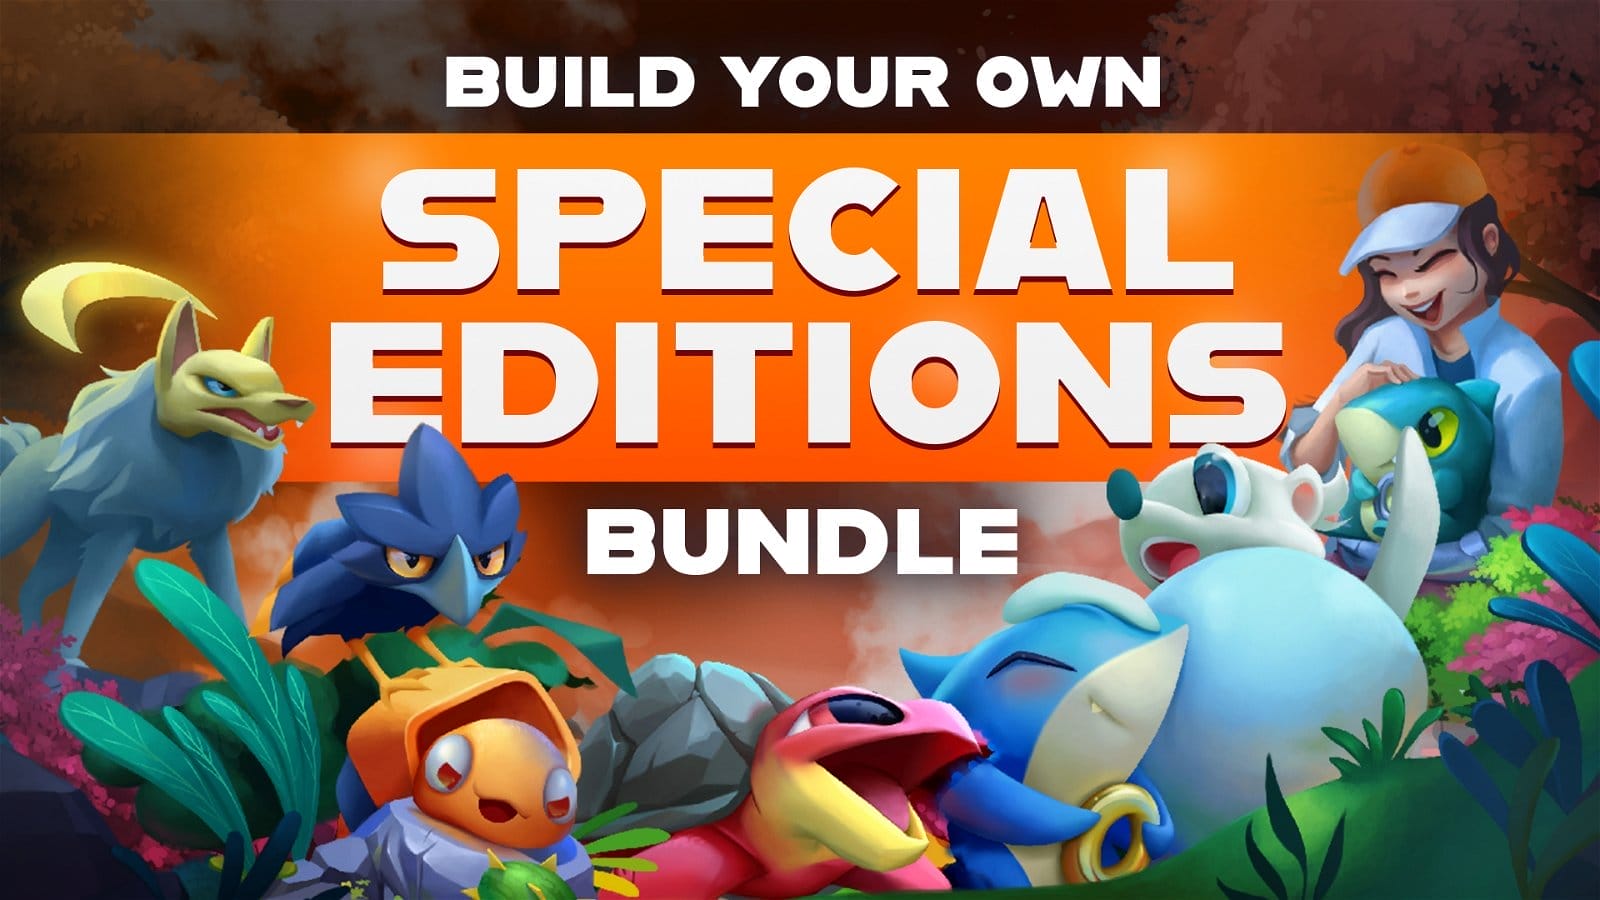 Build Your Own Special Editions Bundle